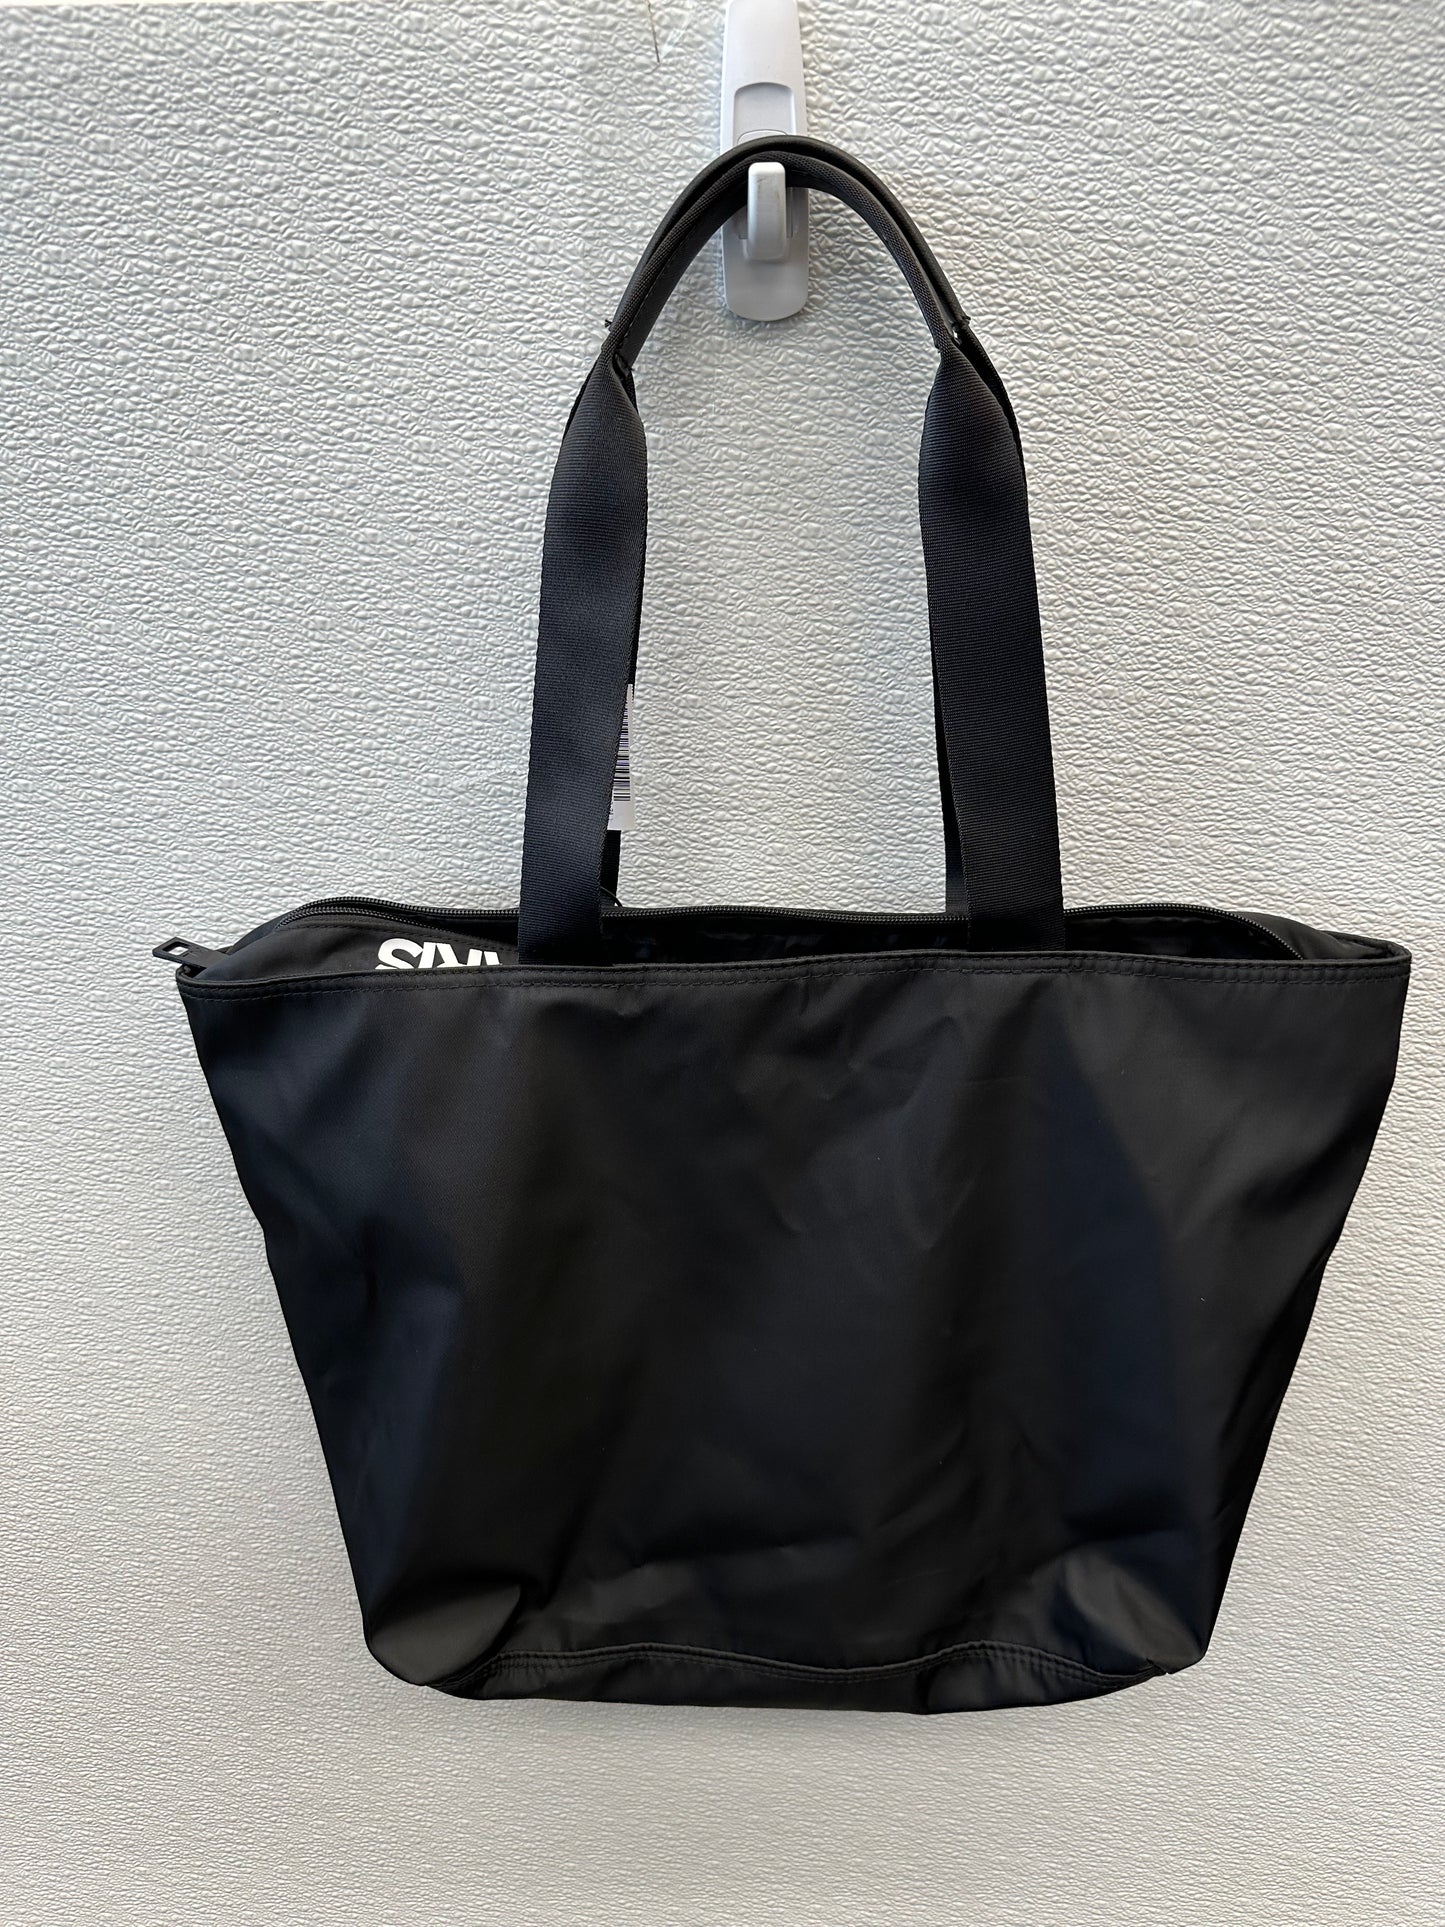 Tote By Karl Lagerfeld  Size: Large